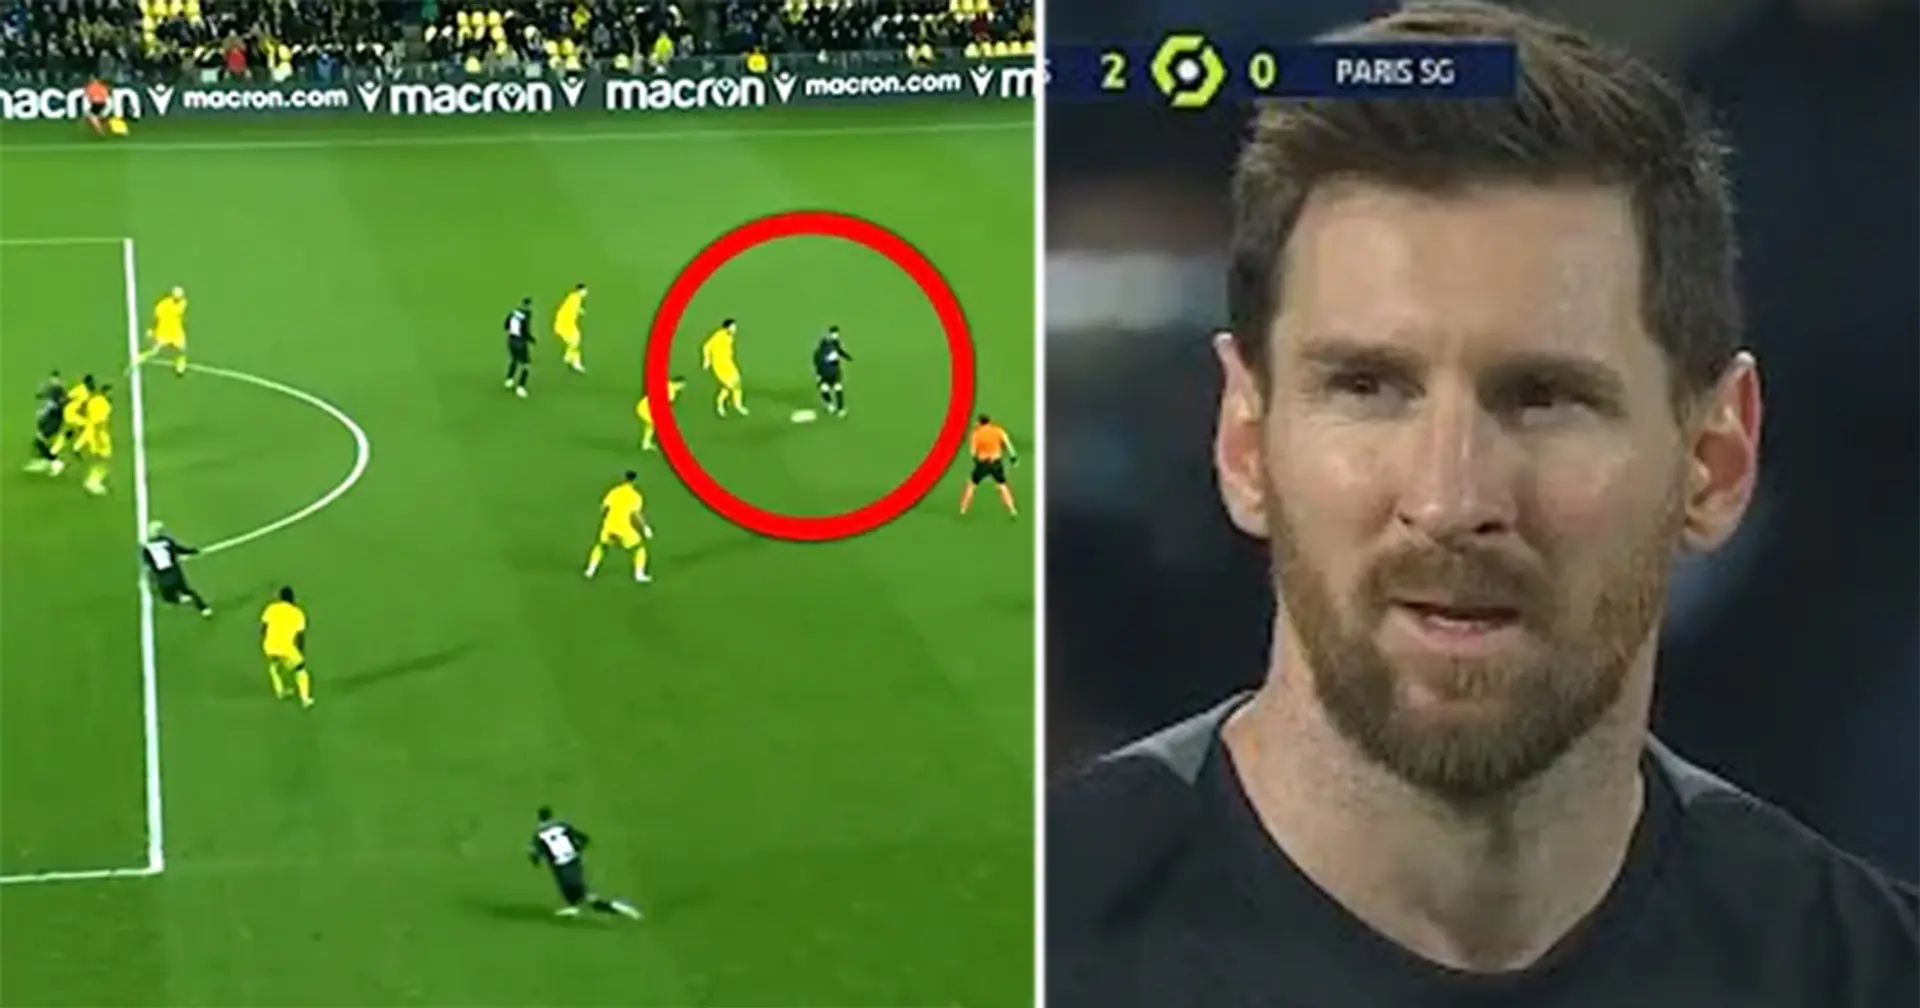 Messi makes headlines with gorgeous assist for Neymar vs Nantes